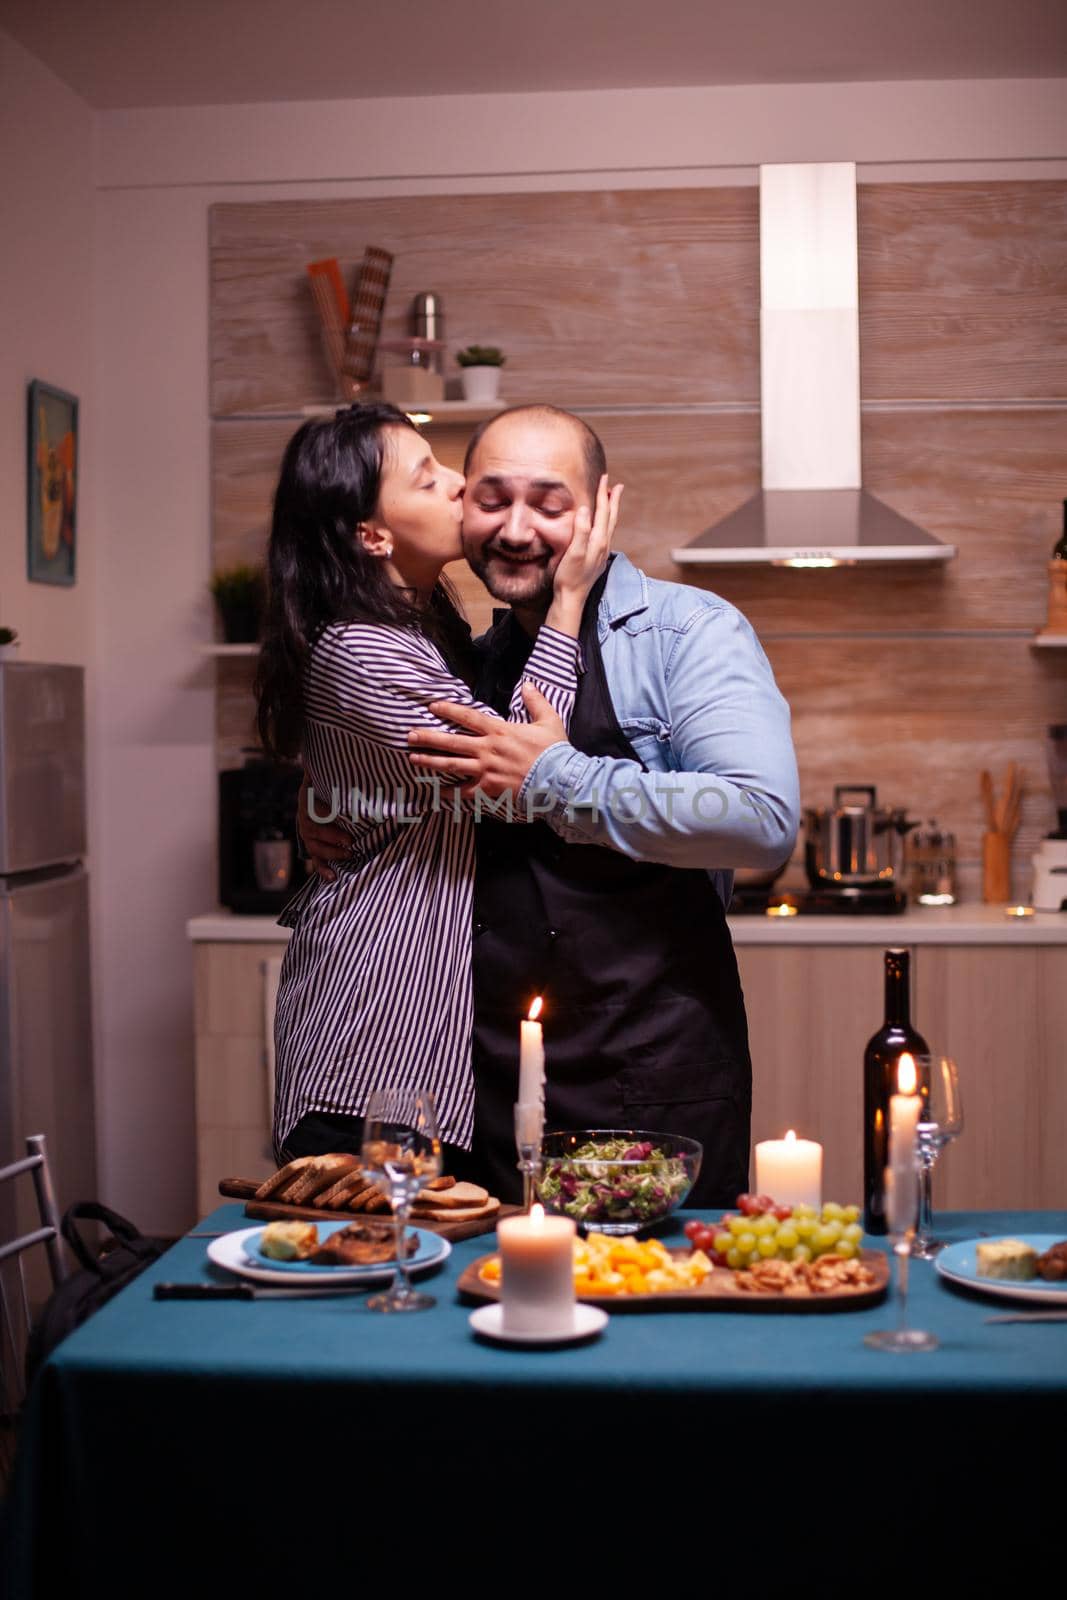 Wife giving husband affection in kitchen during romantic date in the evening. Man preparing festive dinner with healthy food, cooking for his woman a romantic dinner,